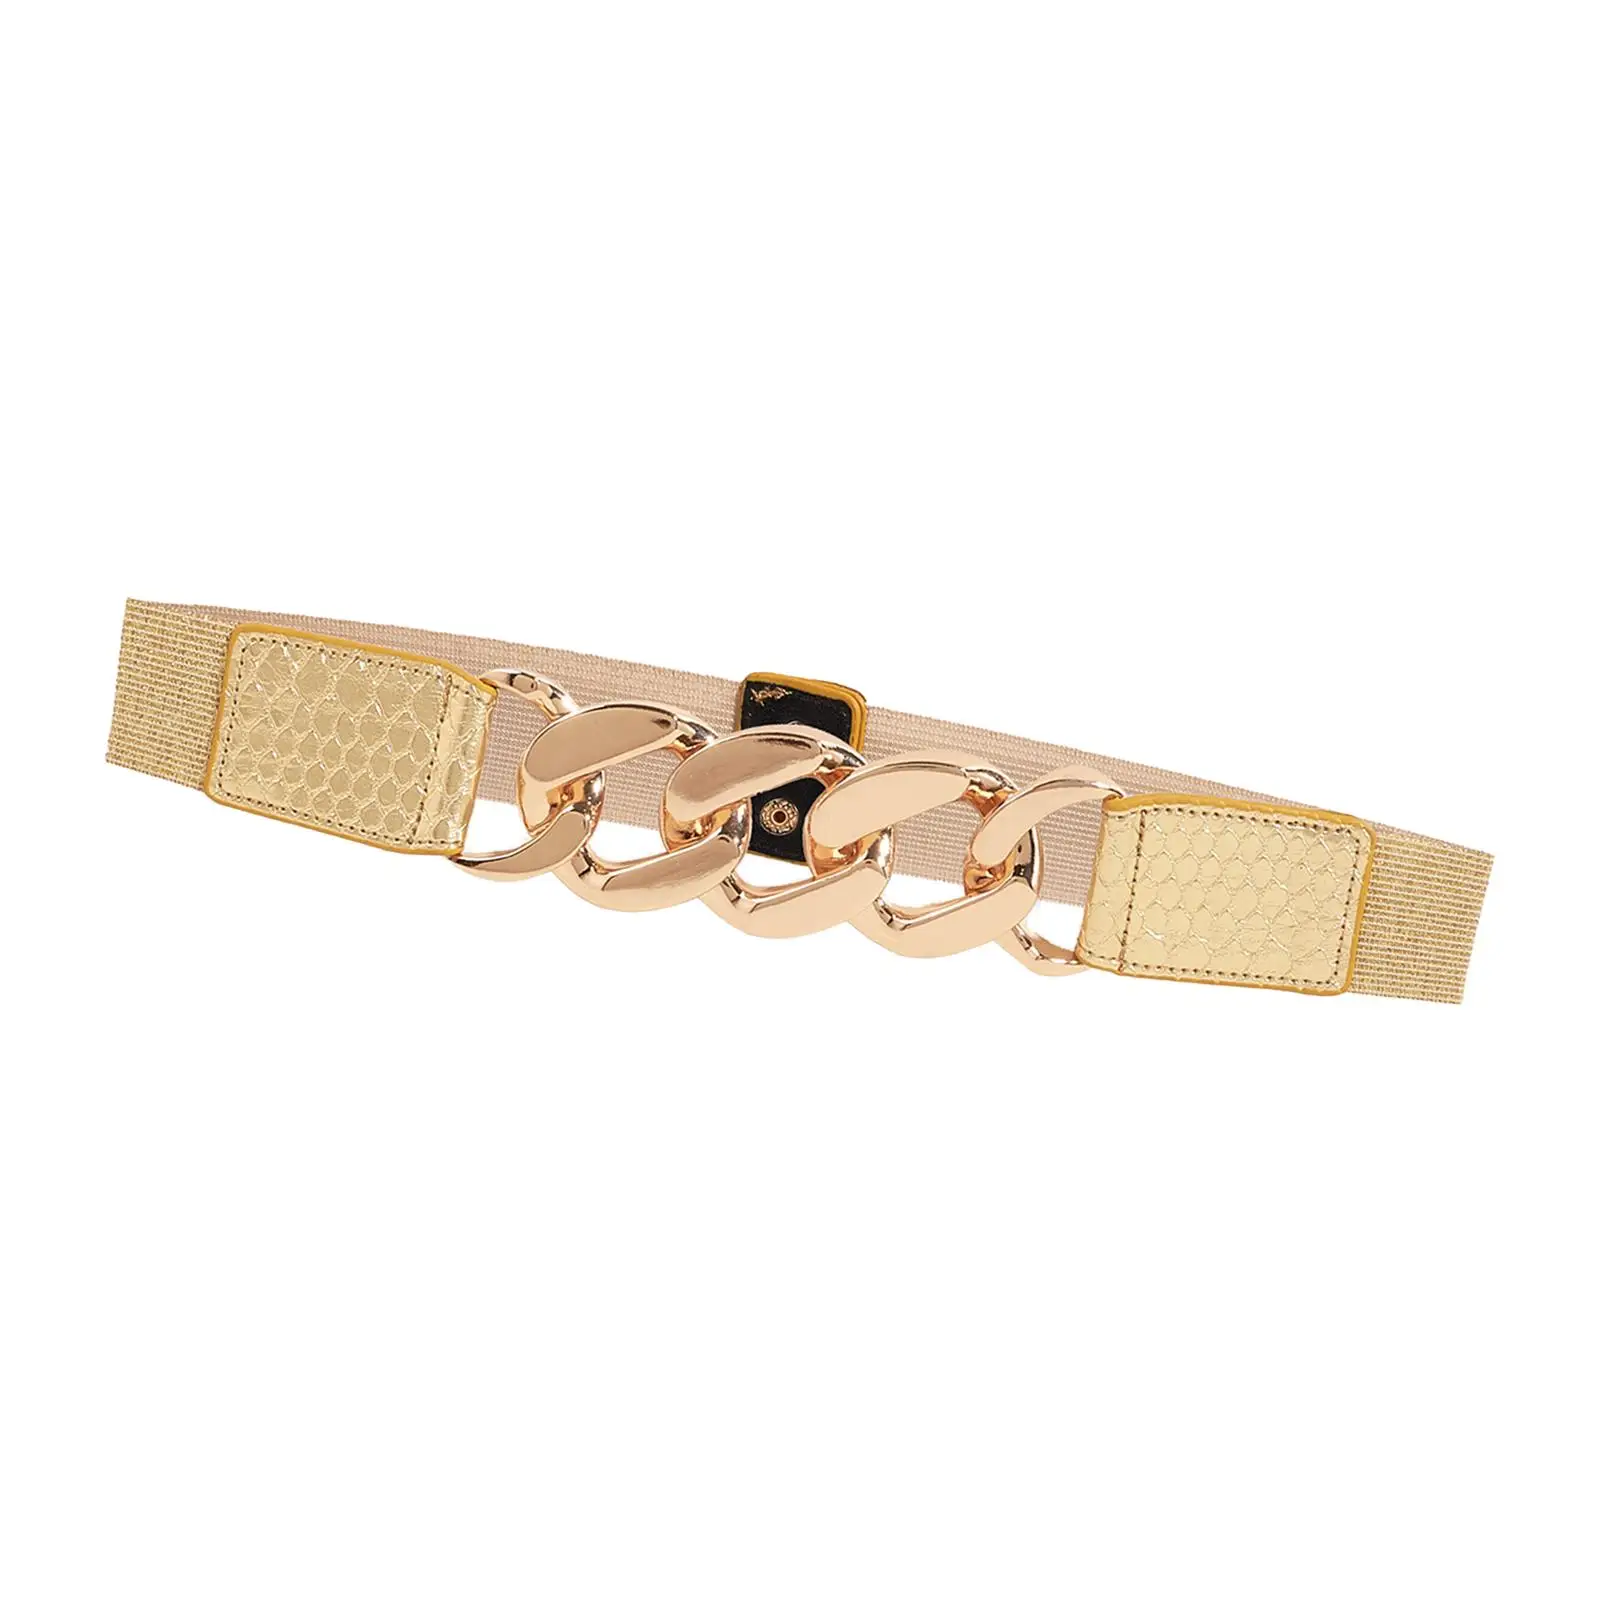 Fashionable Women`s Waist Belts with Chic Metal Chain Detailing